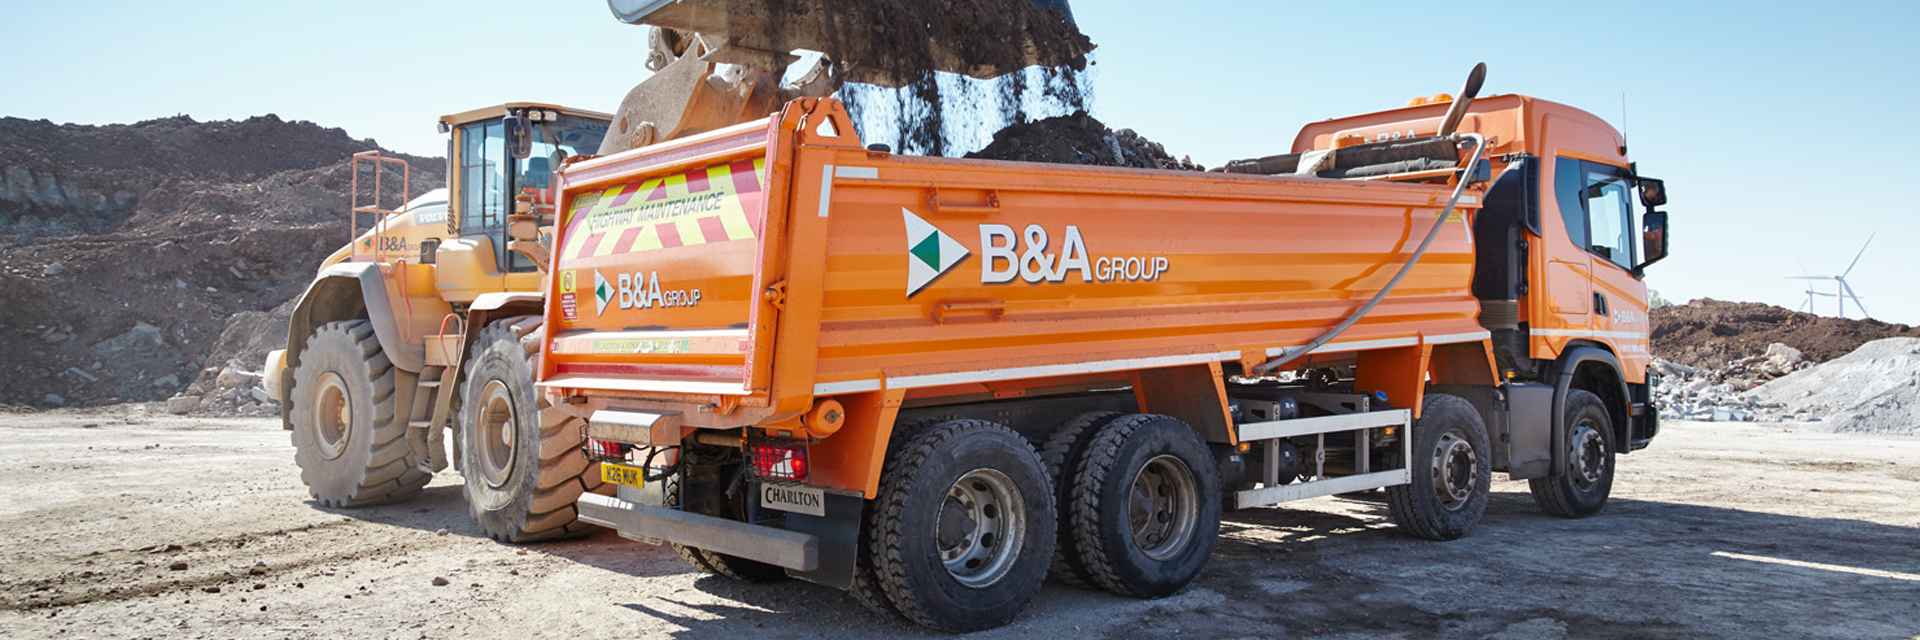 B&A Group joins the Heidelberg Materials family